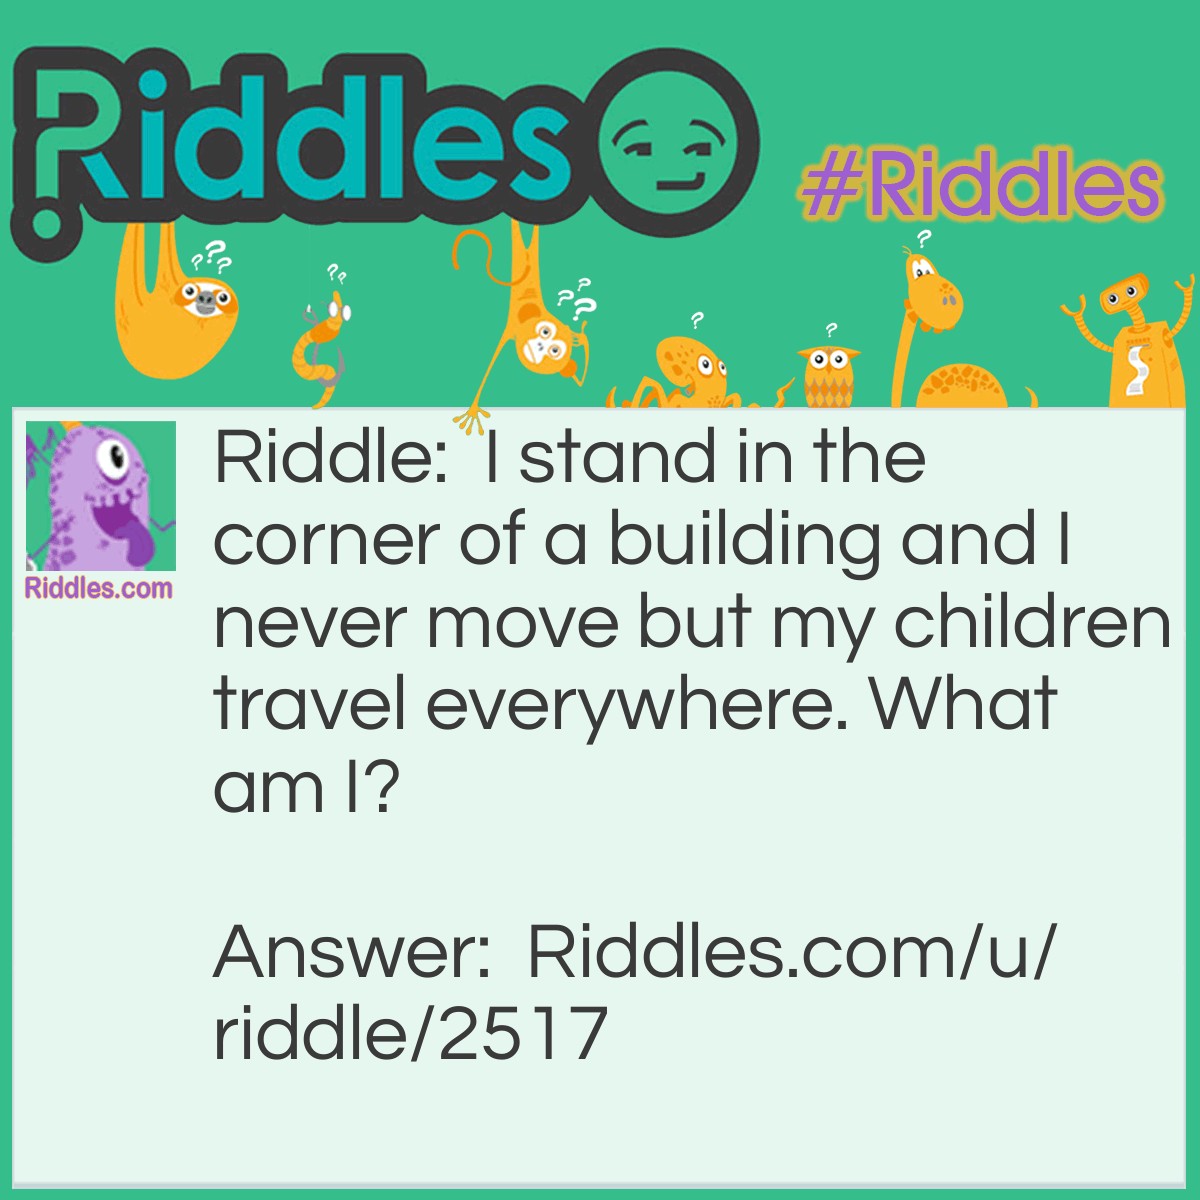 Riddle: I stand in the corner of a building and I never move but my children travel everywhere. What am I? Answer: A mailbox!